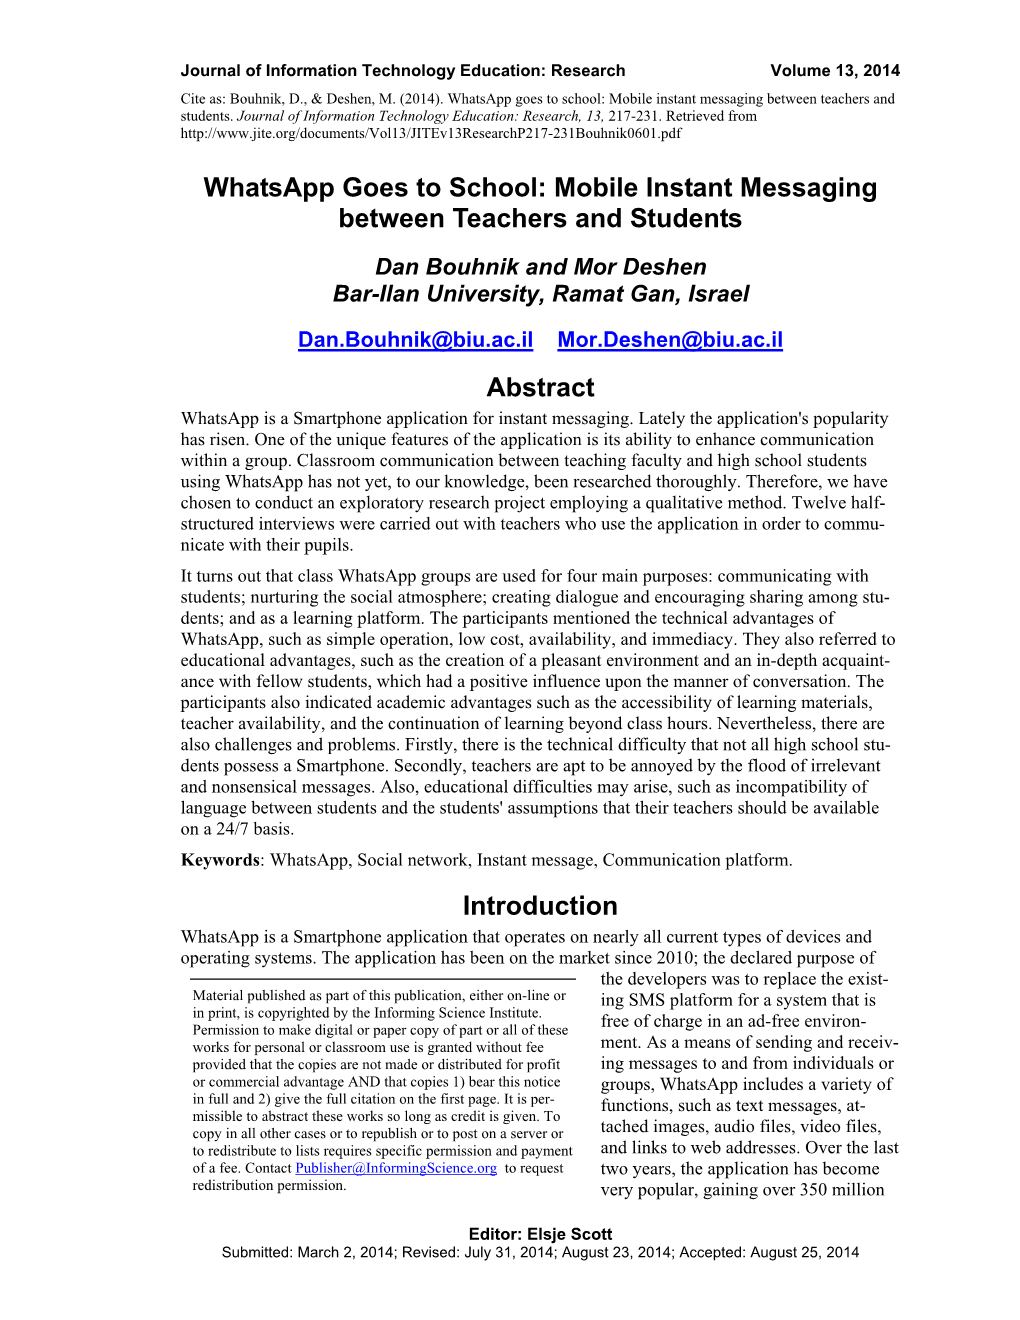 Whatsapp Goes to School: Mobile Instant Messaging Between Teachers and Students